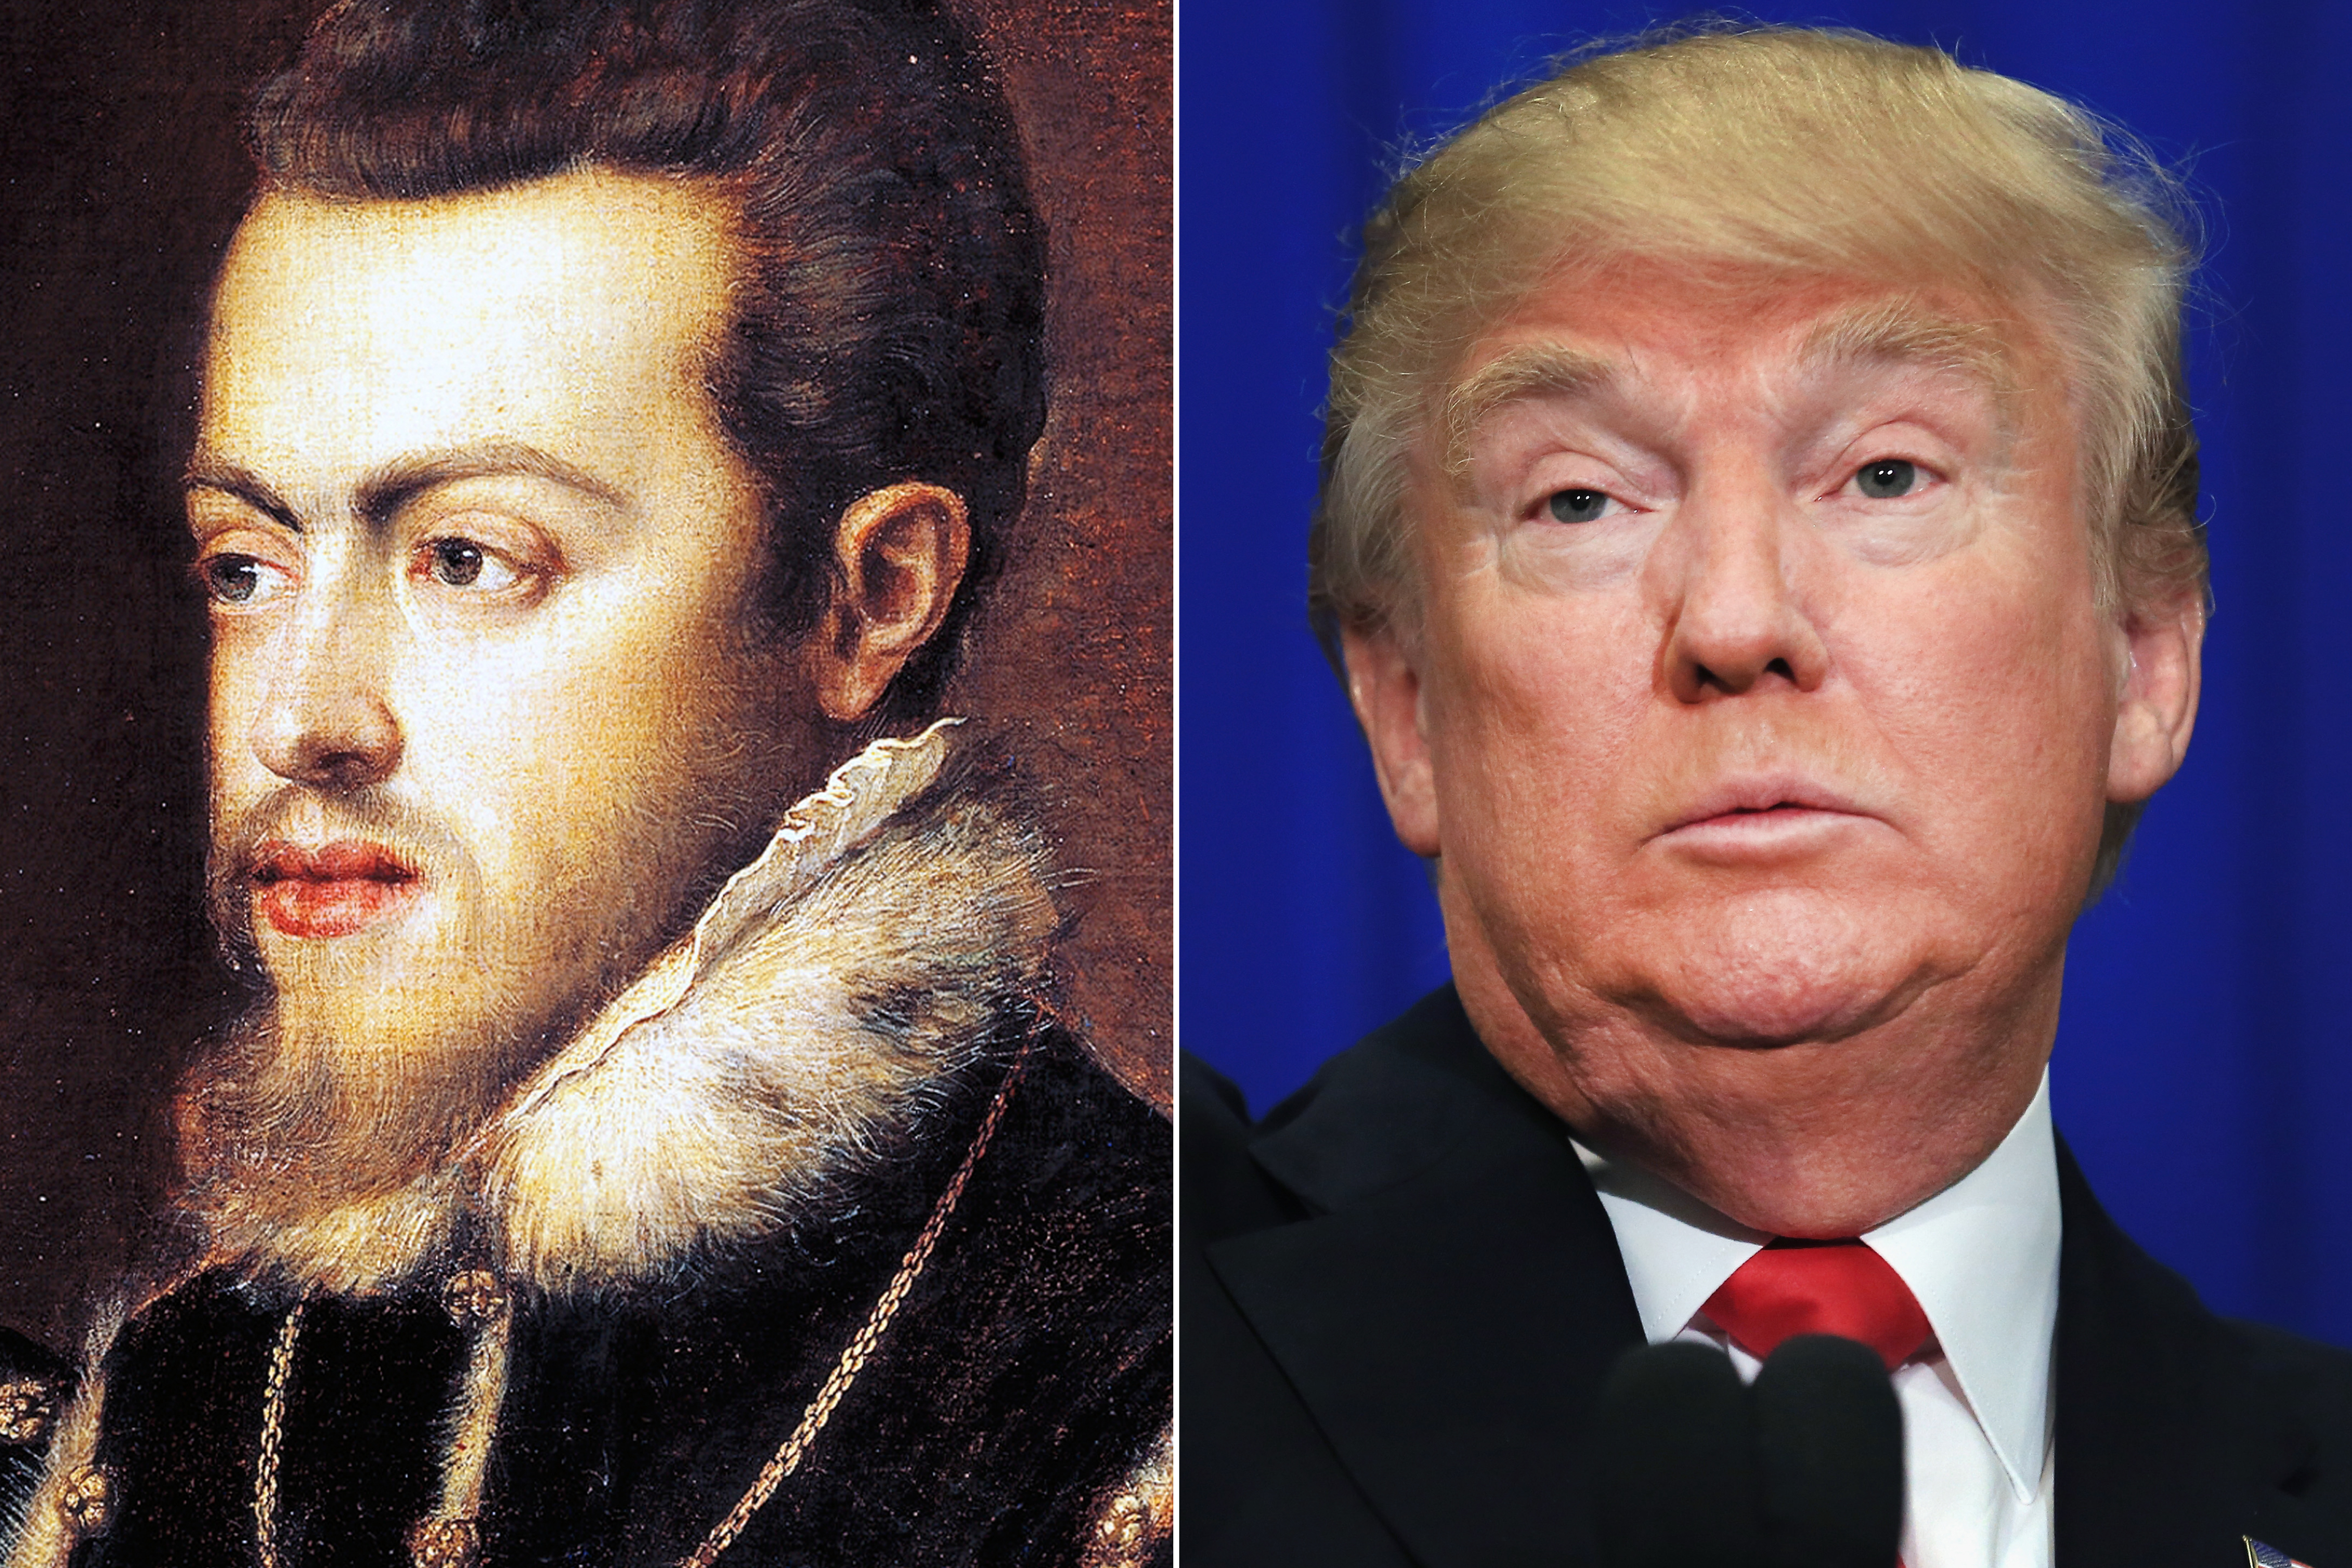 Painting by Titian, of Philip II of Spain (L); Donald Trump speaks in Fort Worth, TX, on Feb. 26, 2016. (DeAgostini—Getty Images (L); Tom Pennington—Getty Images)